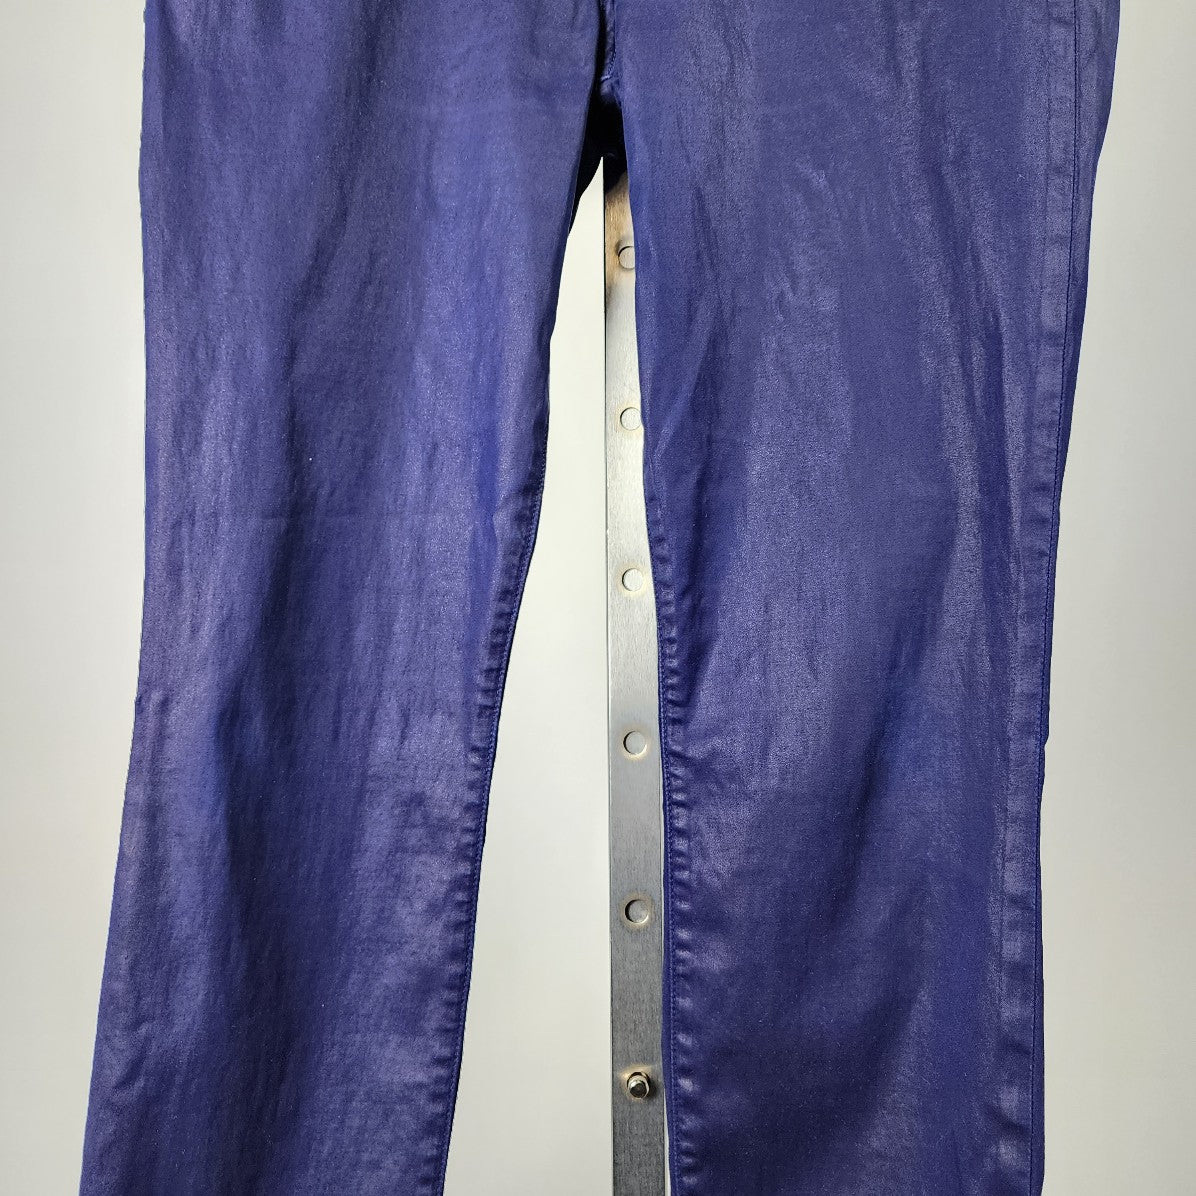 J Brand Blueberry Maria High Rise Skinny Jeans Size 31